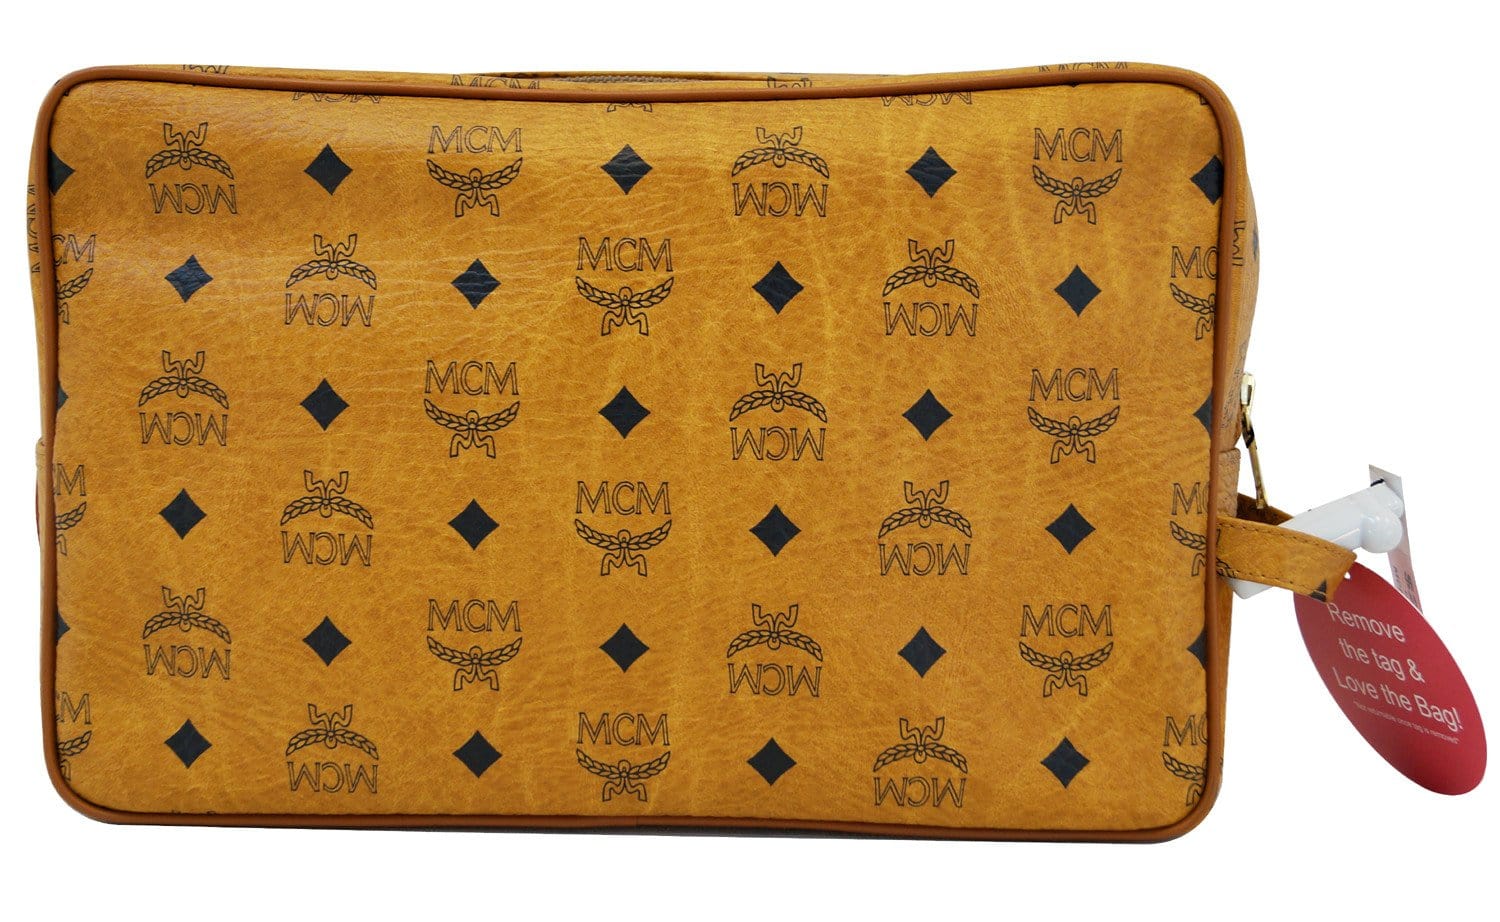 Mcm Authenticated Leather Clutch Bag